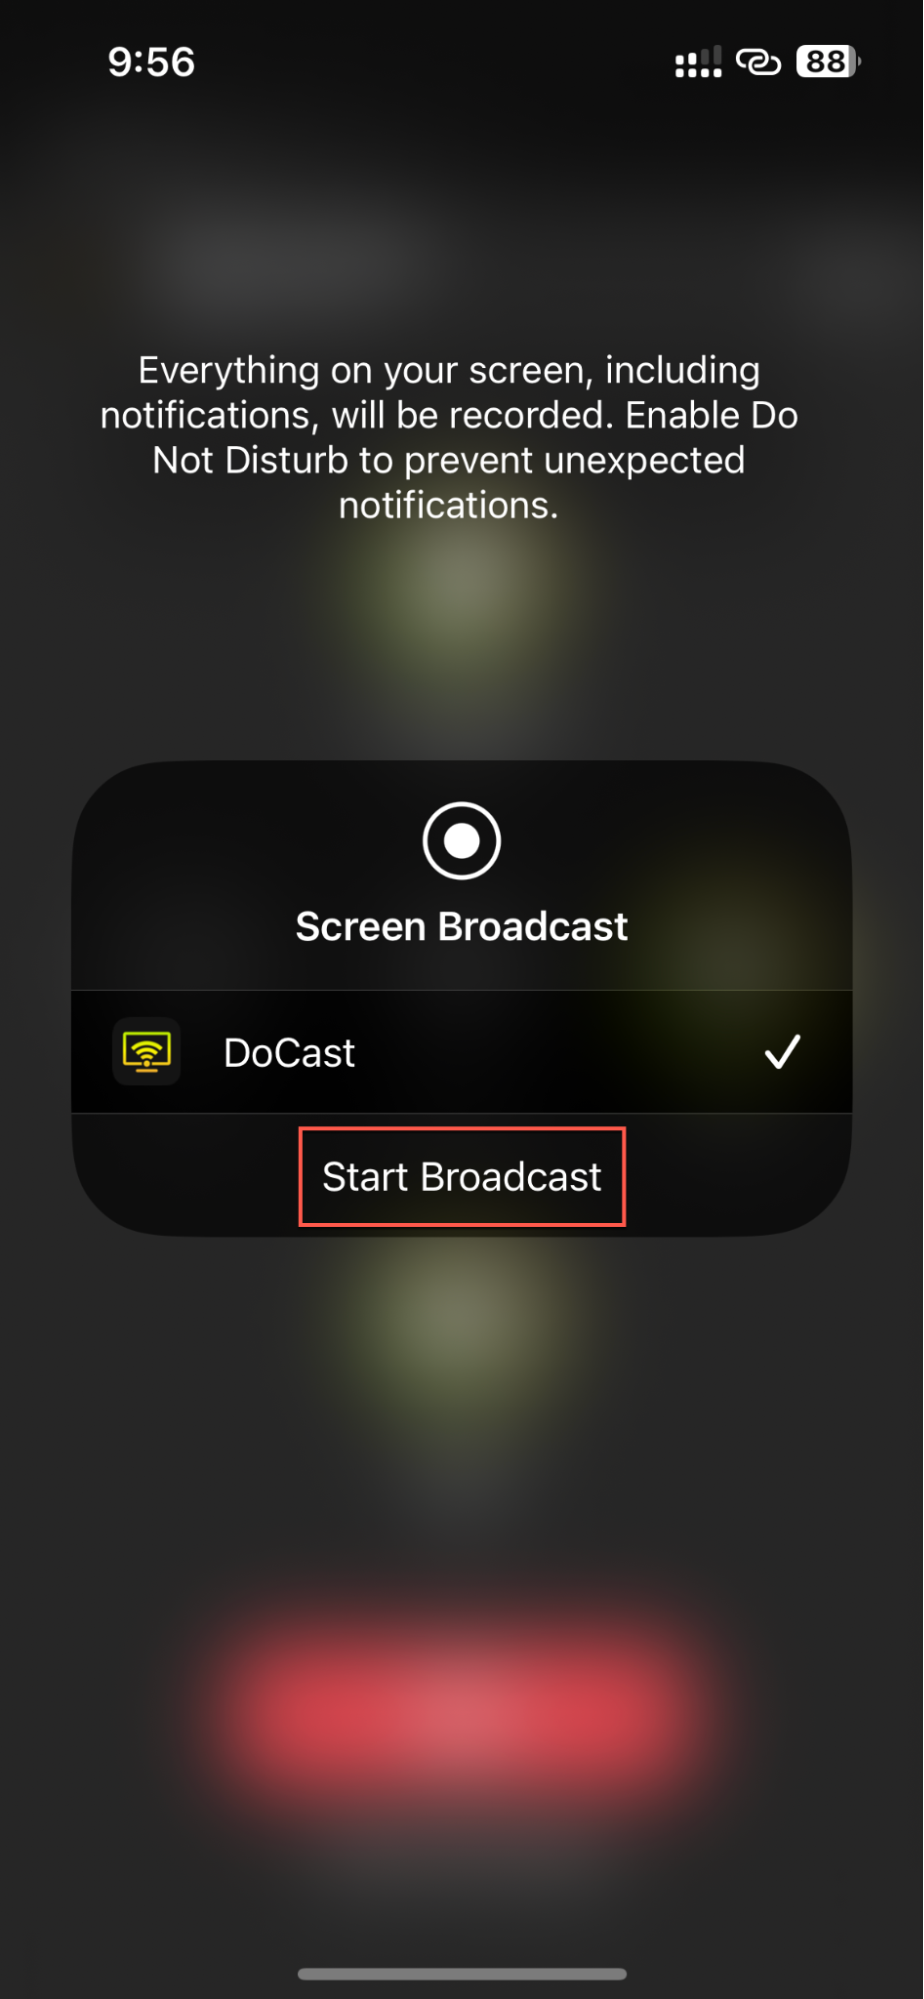 Tap on the Start Broadcast button on the DoCast app